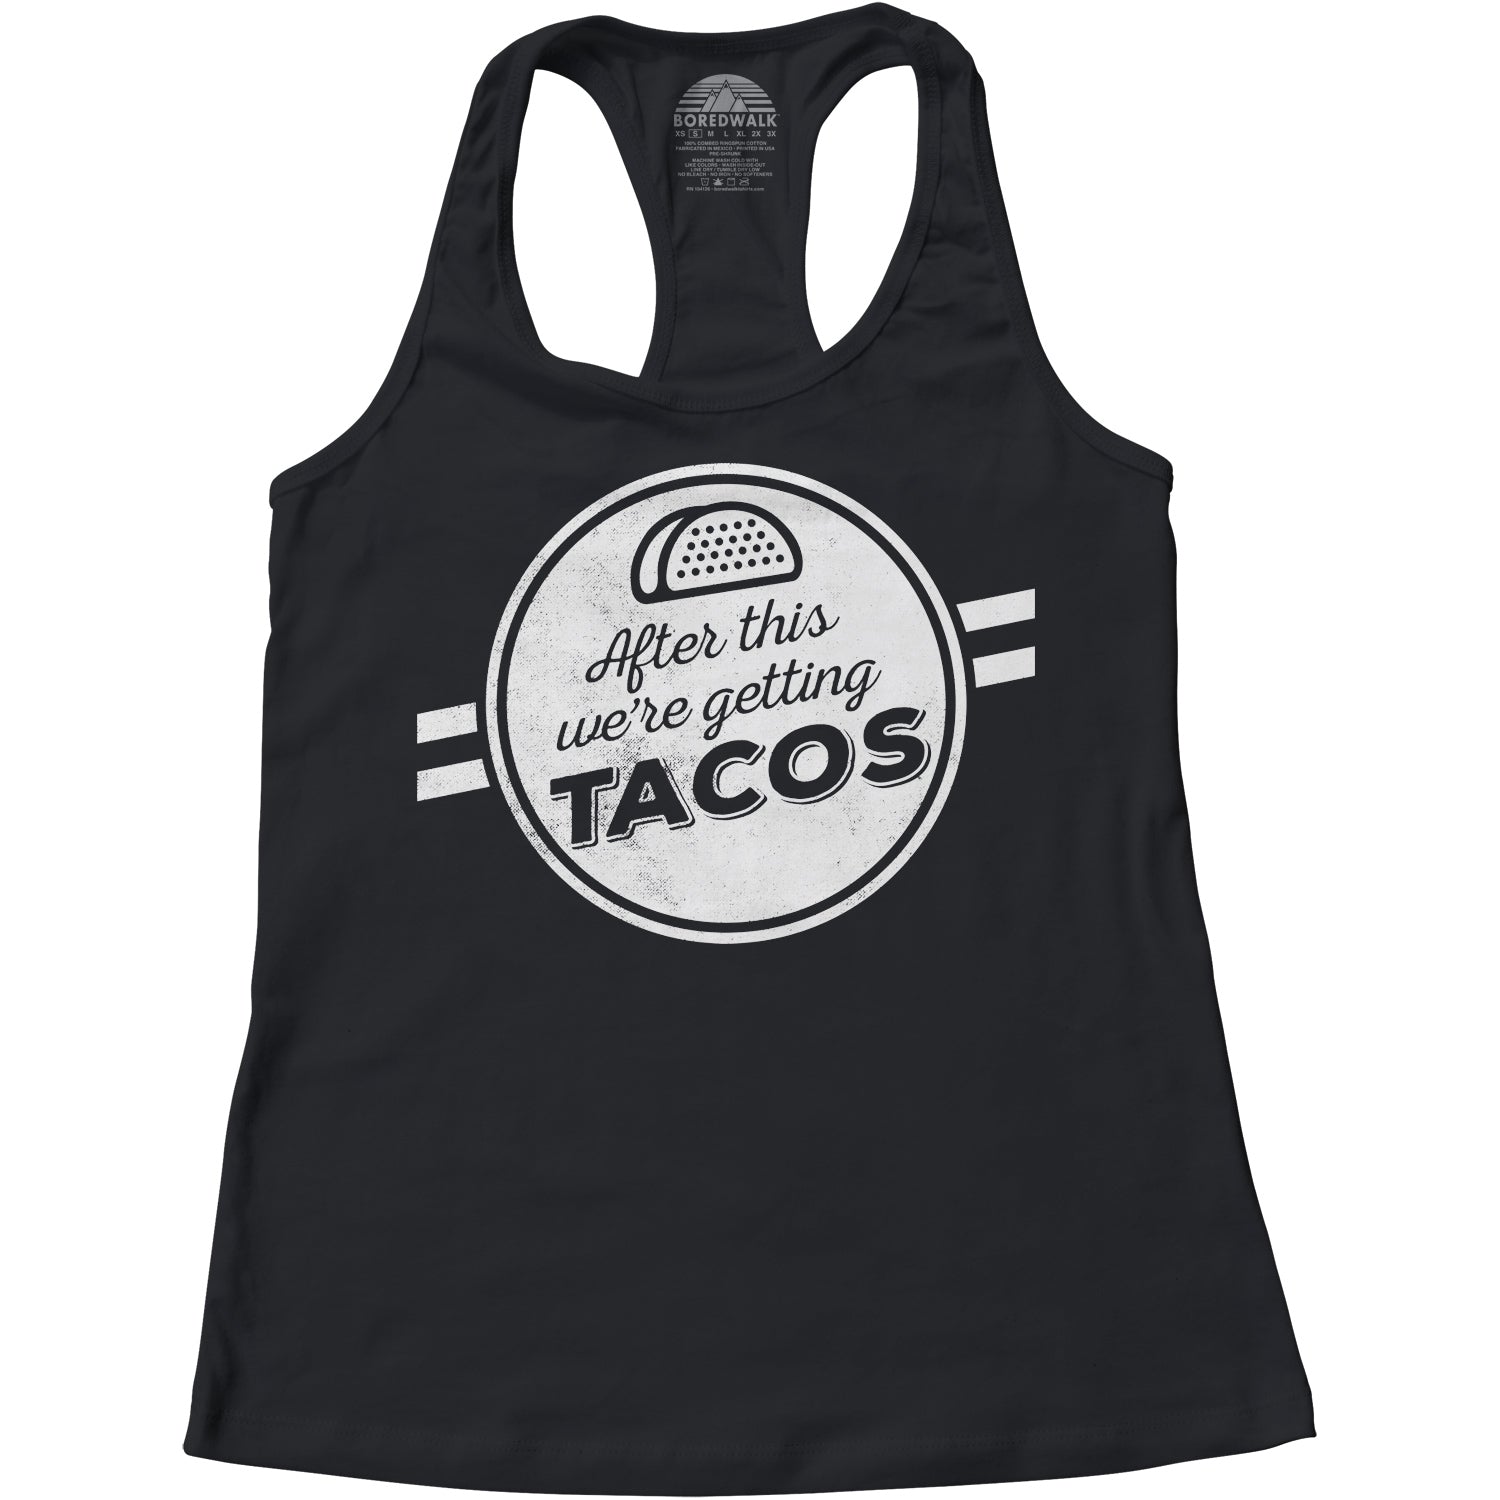 Women's After This We're Getting Tacos Racerback Tank Top